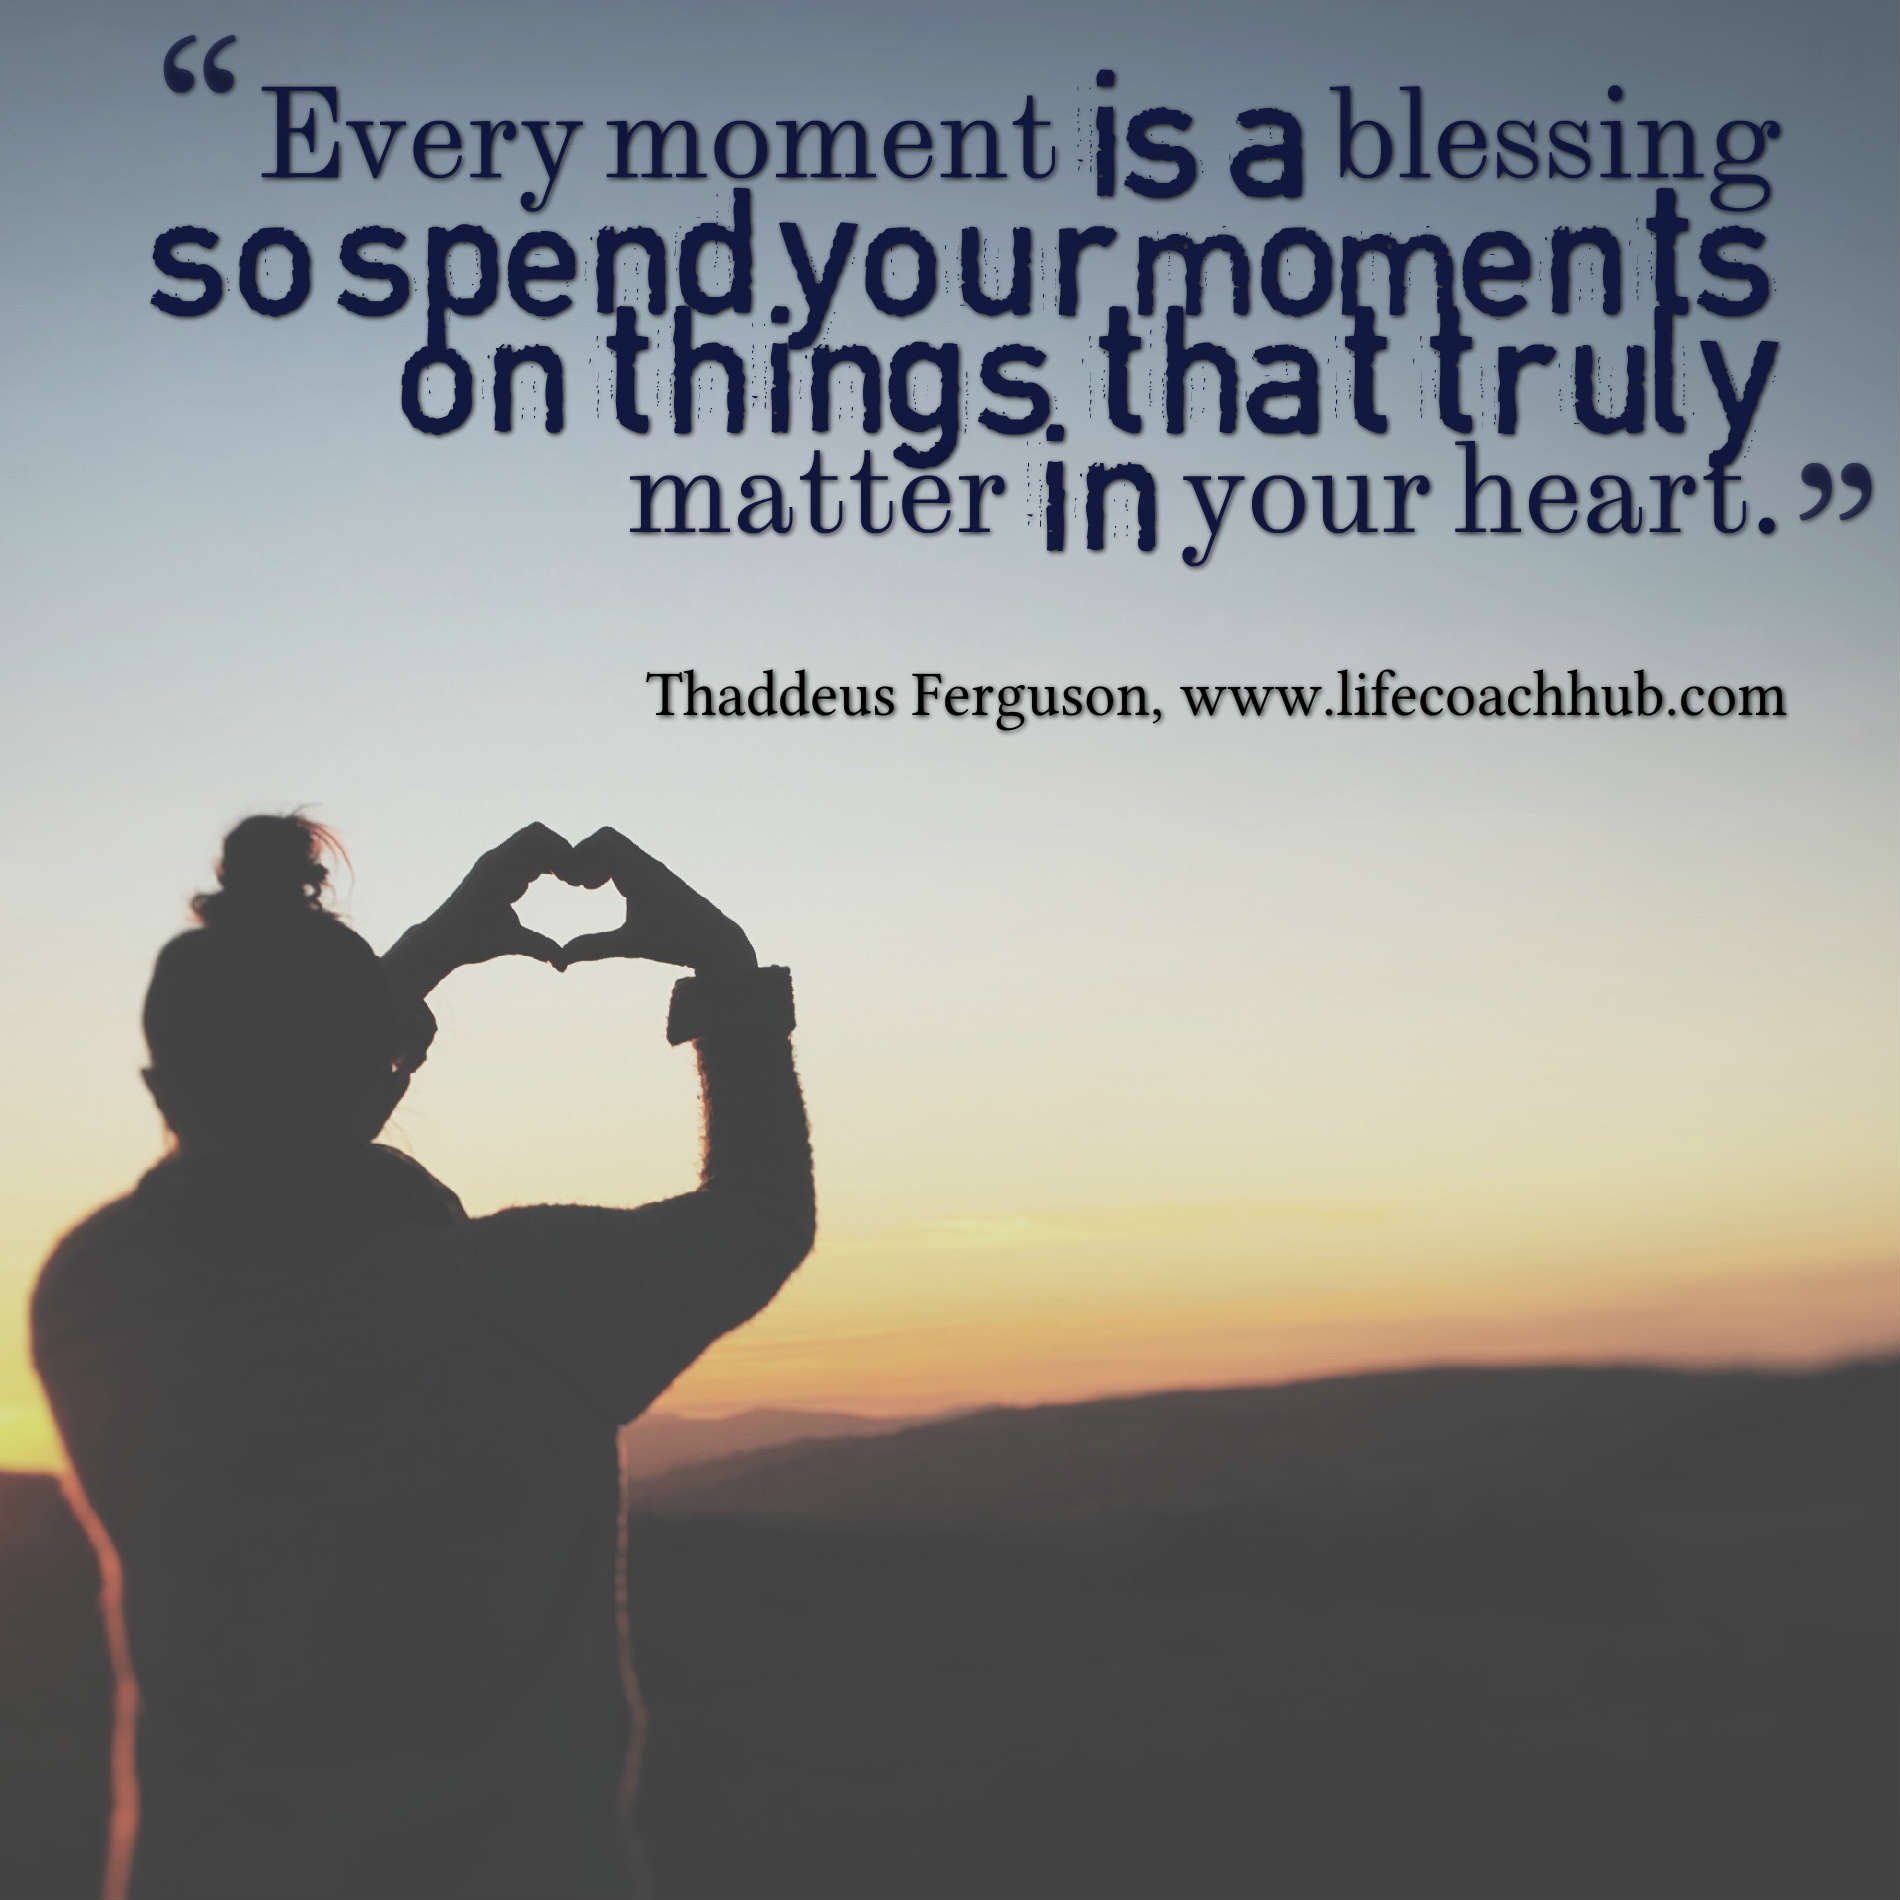 Every Moment is a Blessing